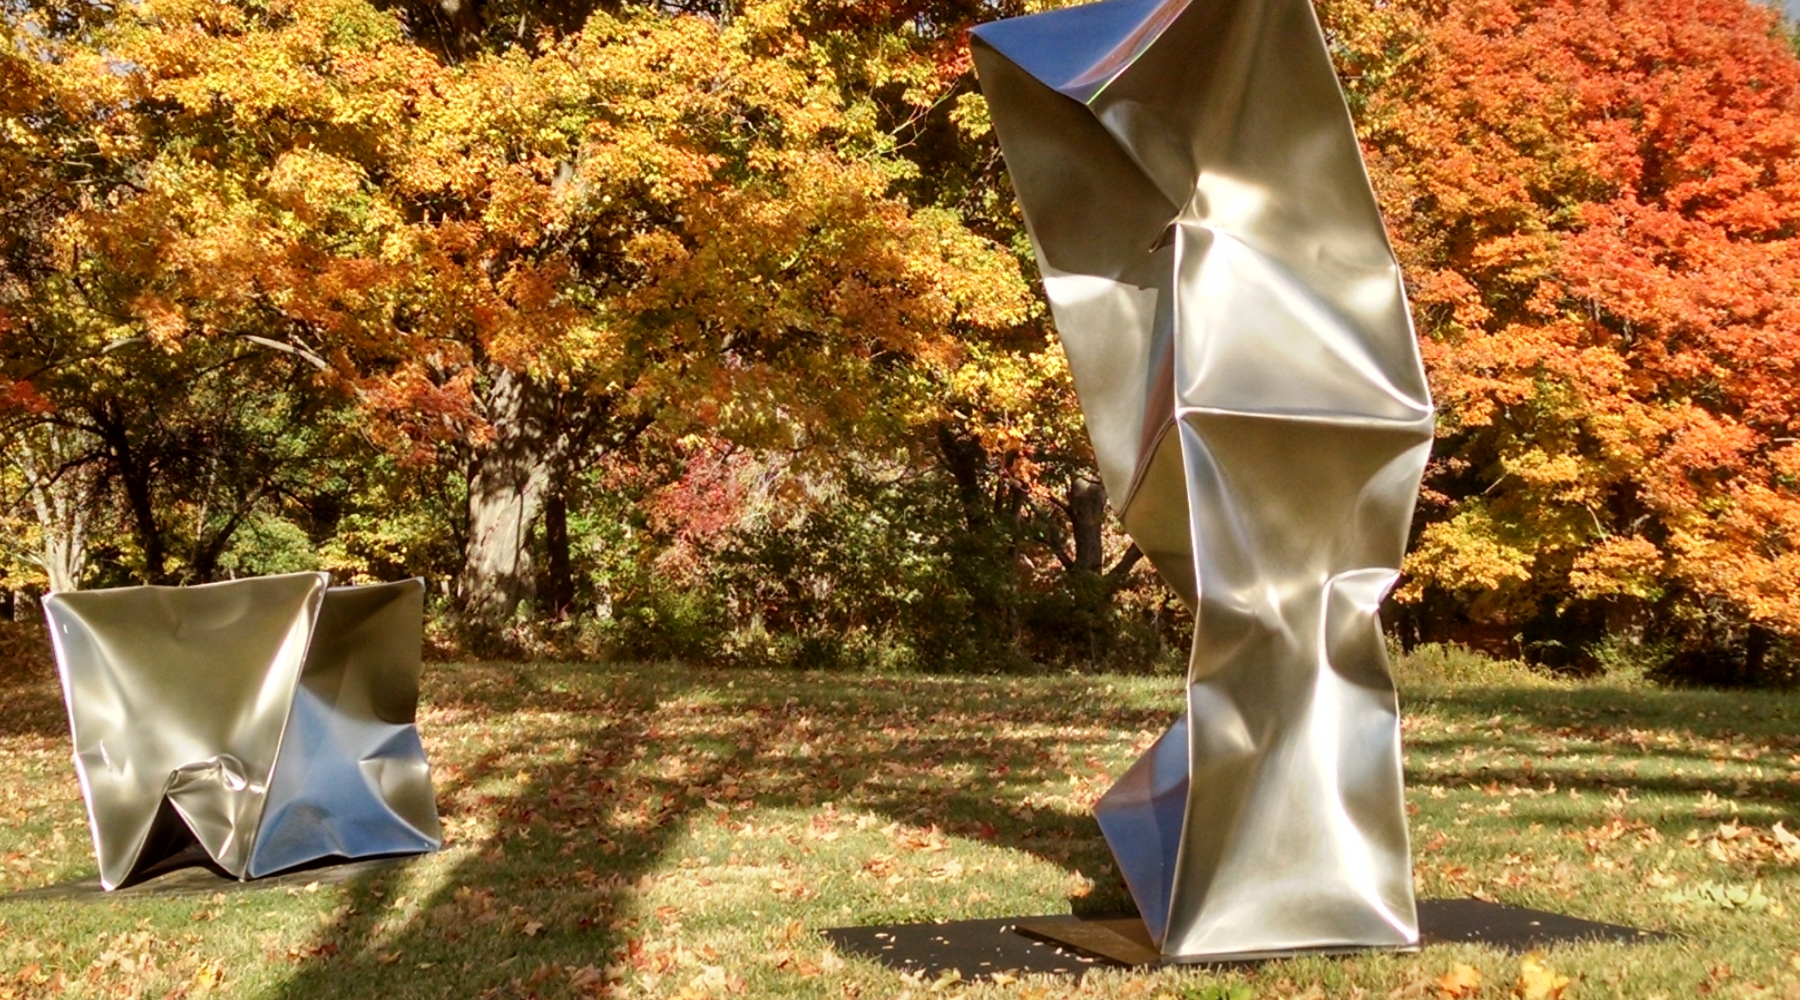 Ewerdt Hilgemann, Imploded Cube and Double NY, 2012-2013, Stainless steel